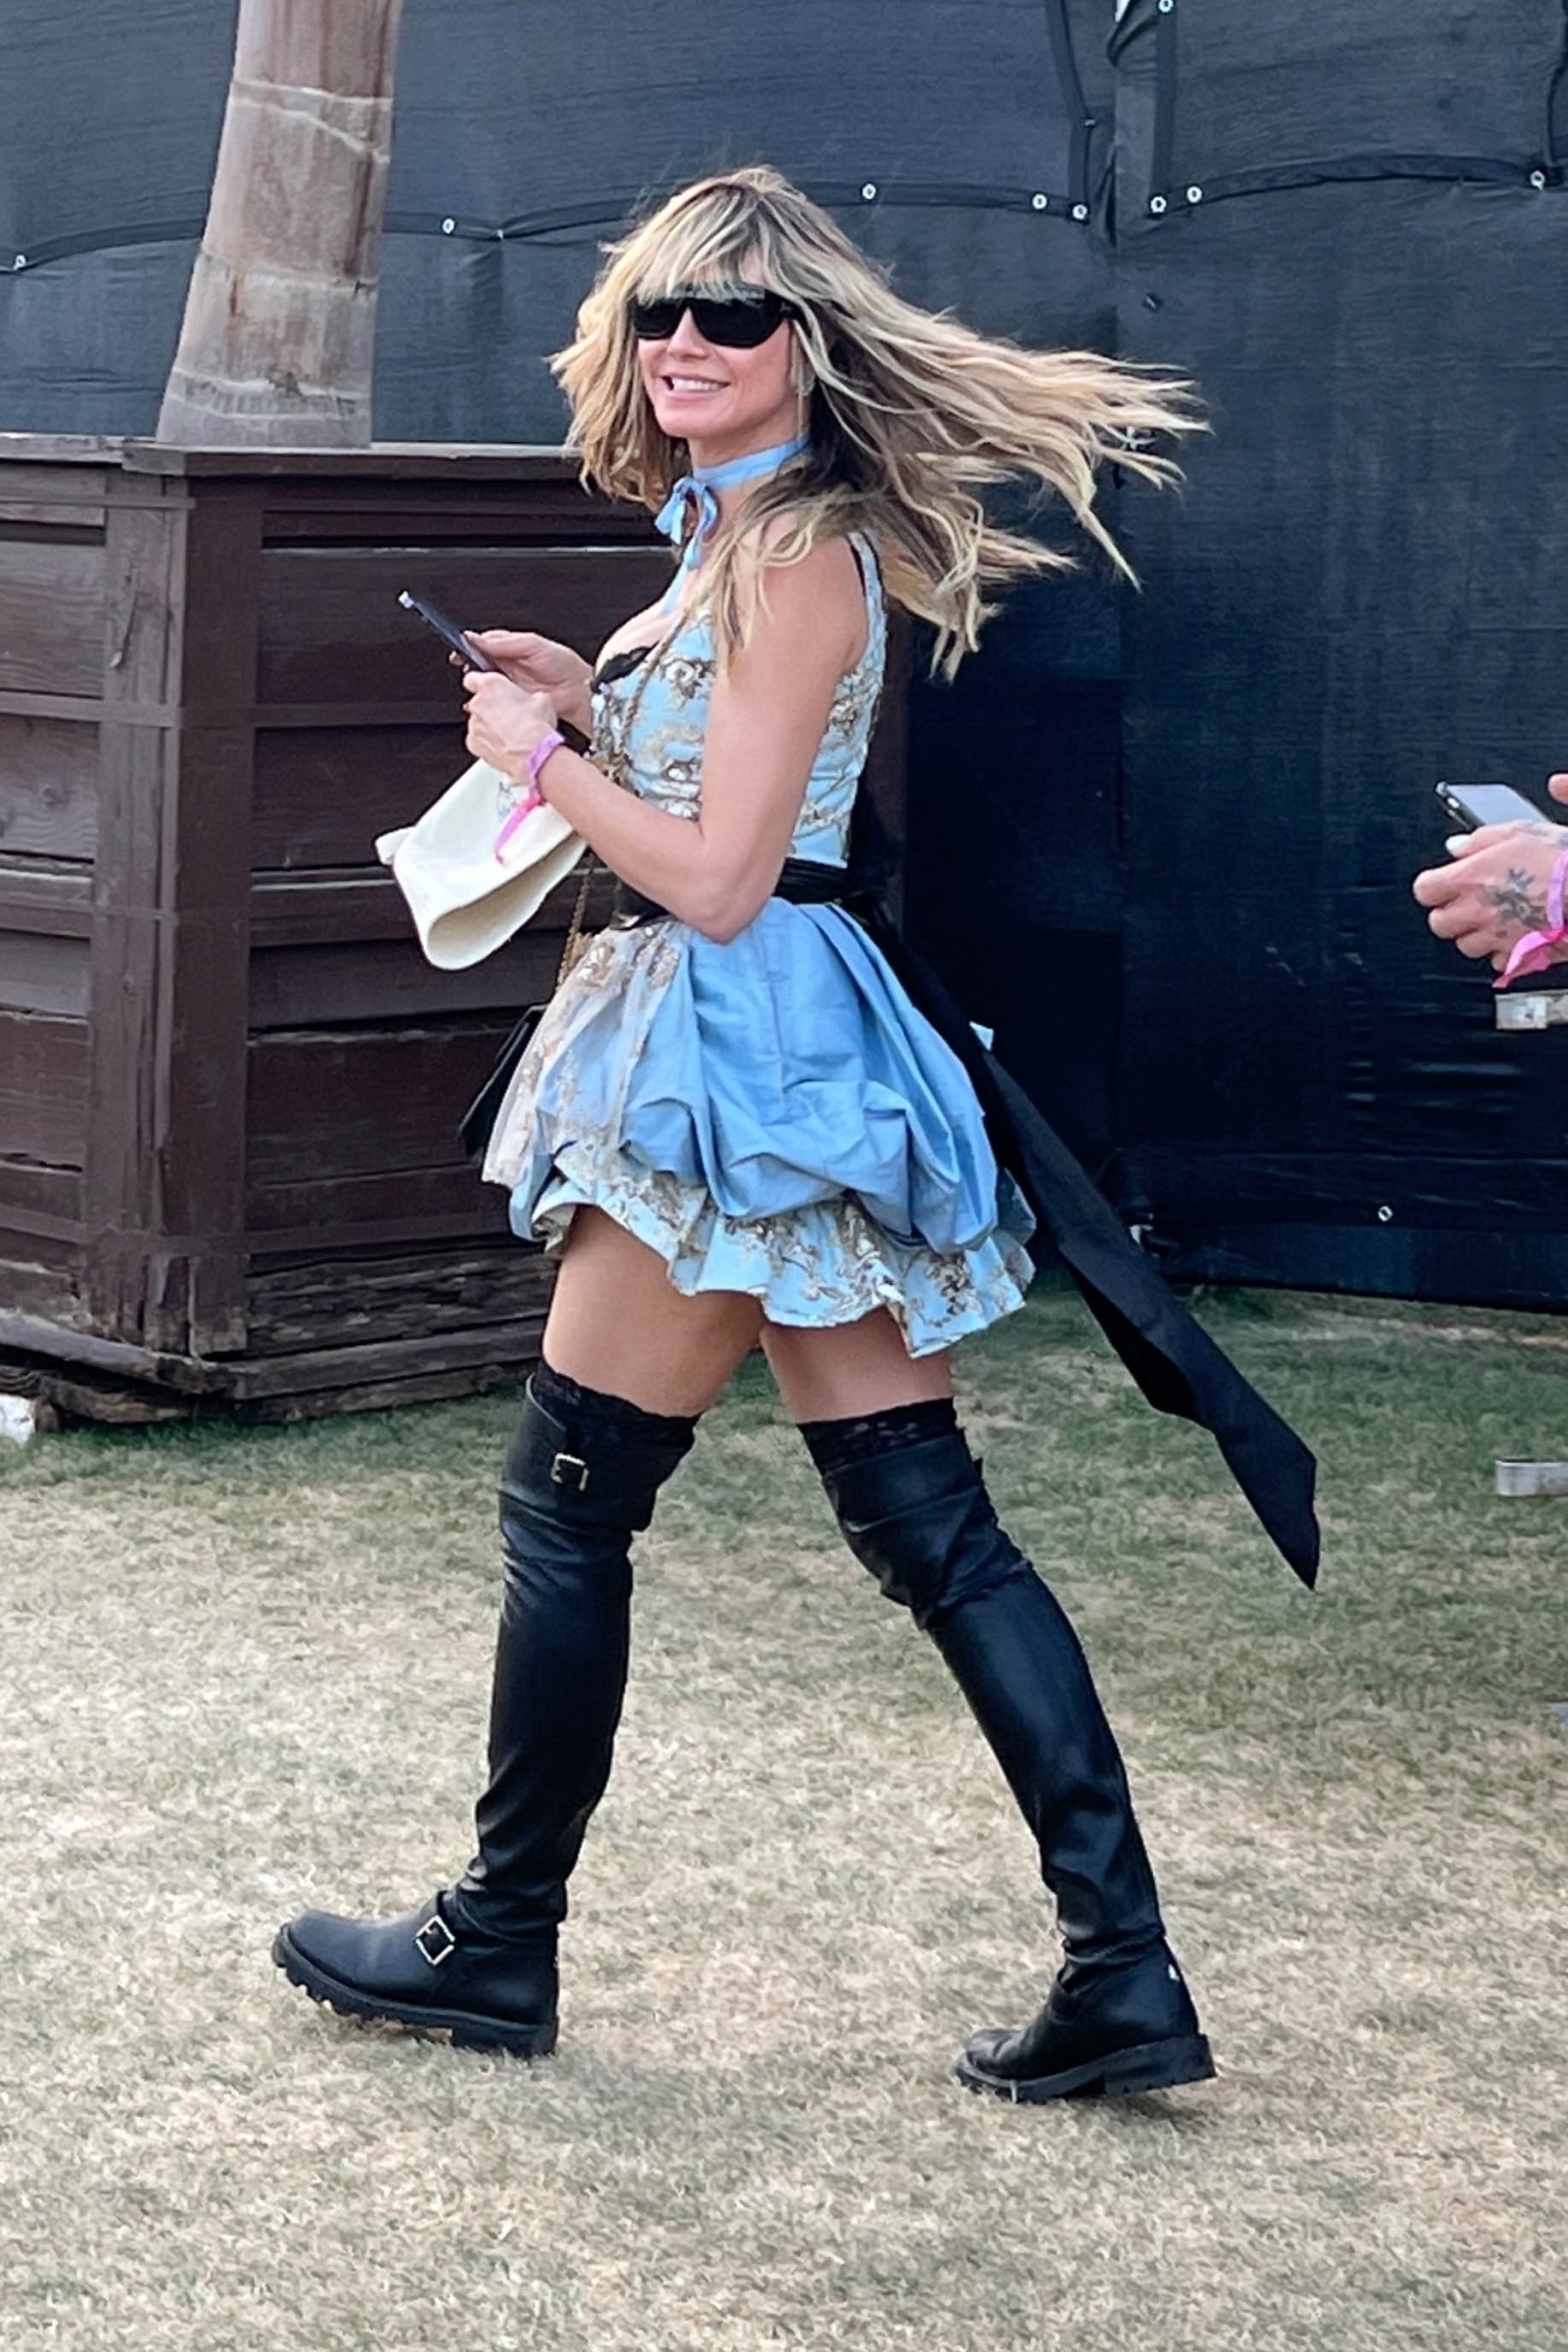 Coachella 2023 Photos: See What the Stars Wore to the Festival